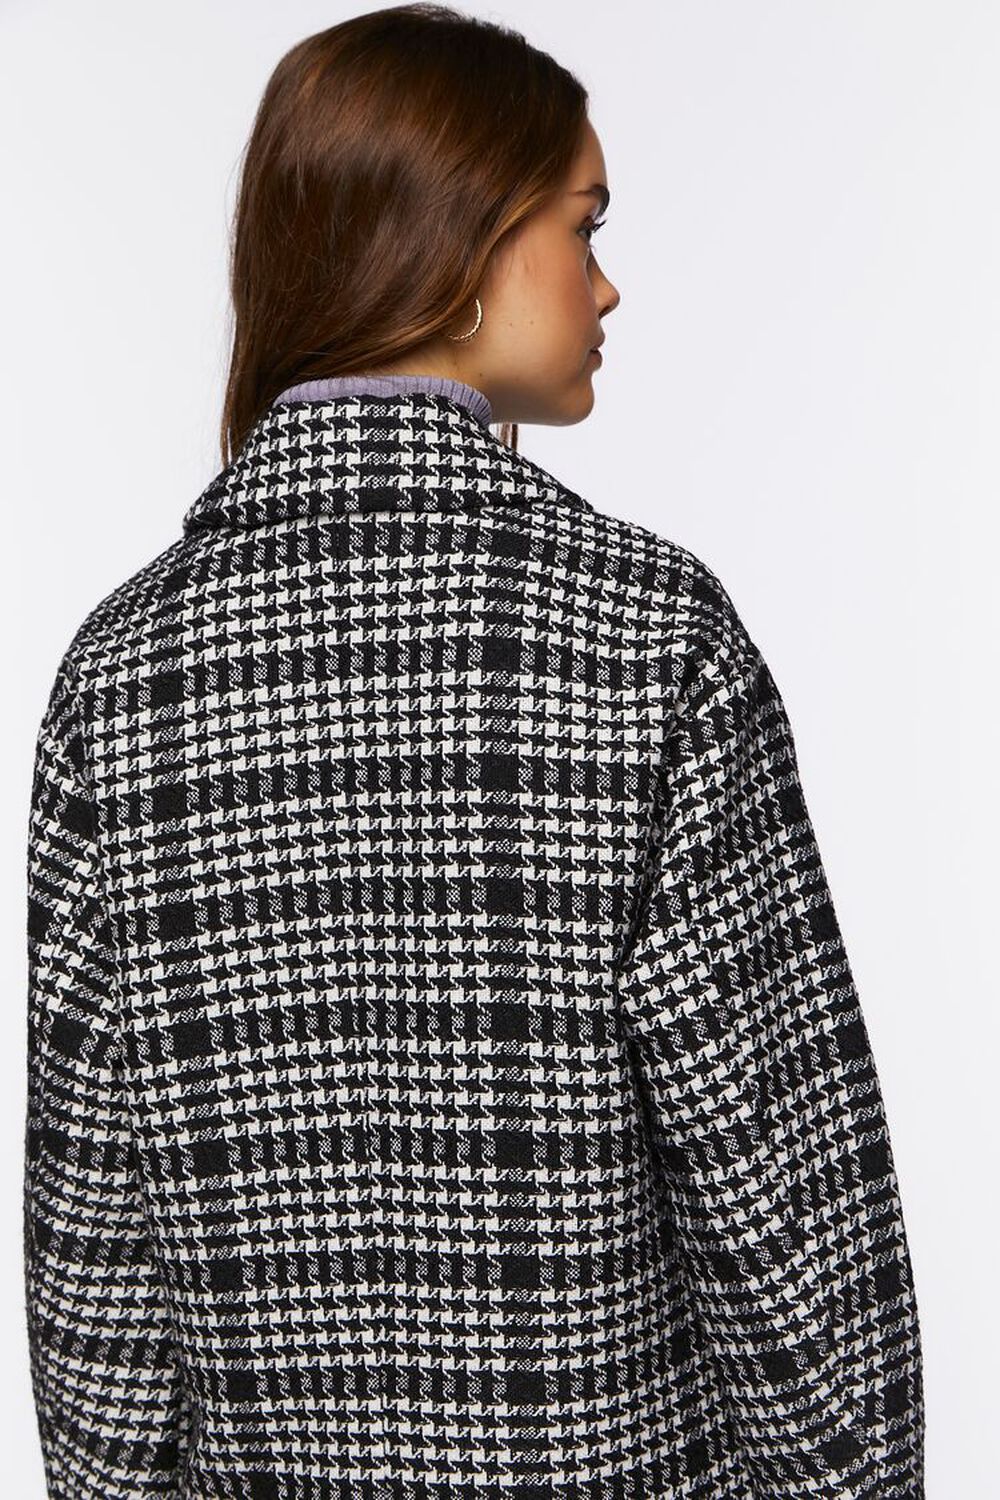 BLACK/WHITE Houndstooth Button-Front Coat, image 3